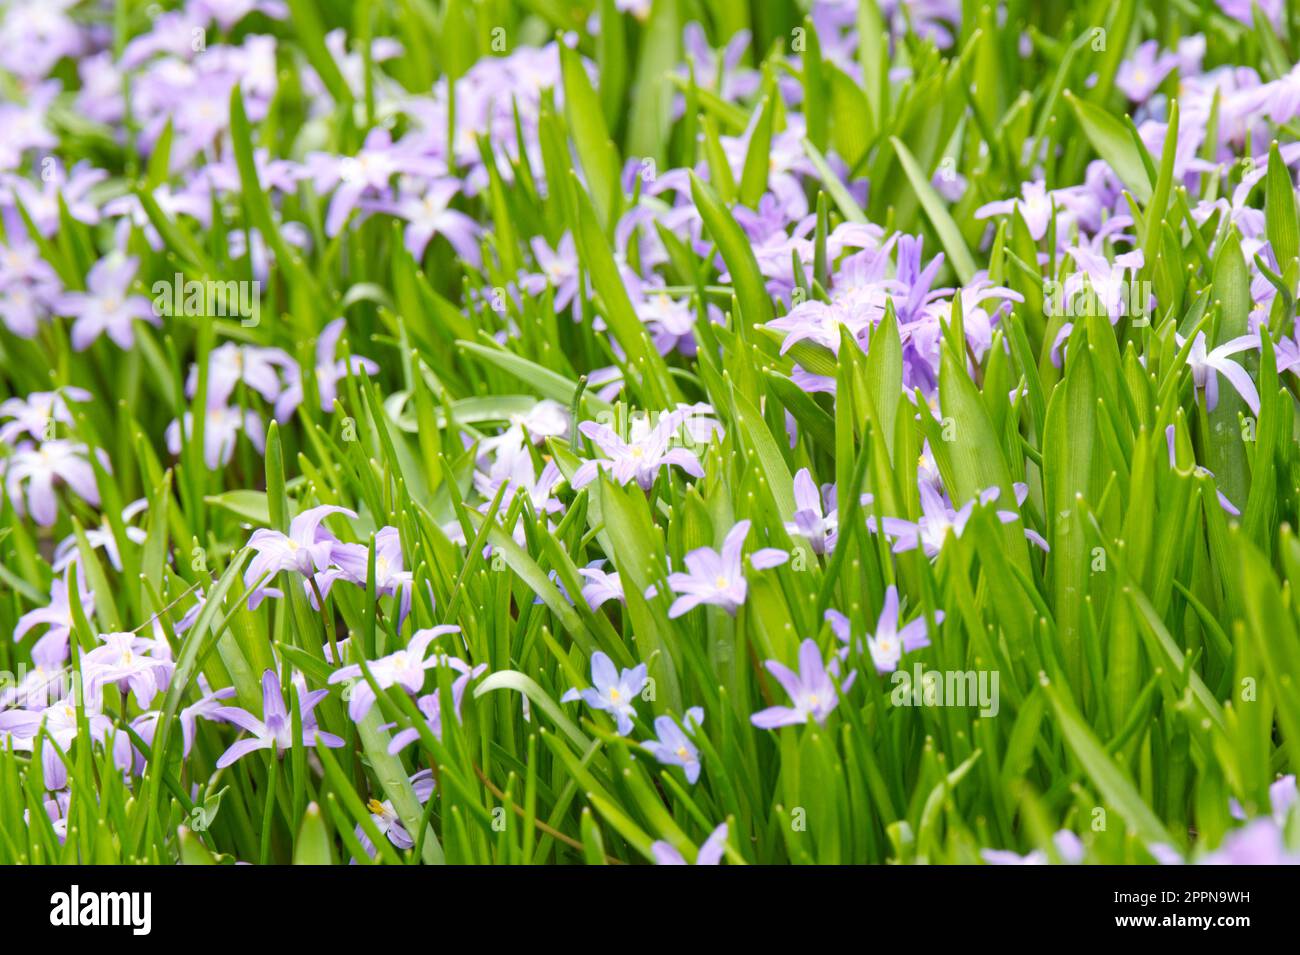 Lilac spring flowers of, Chionodoxa luciliae Violet Beauty in UK garden April Stock Photo